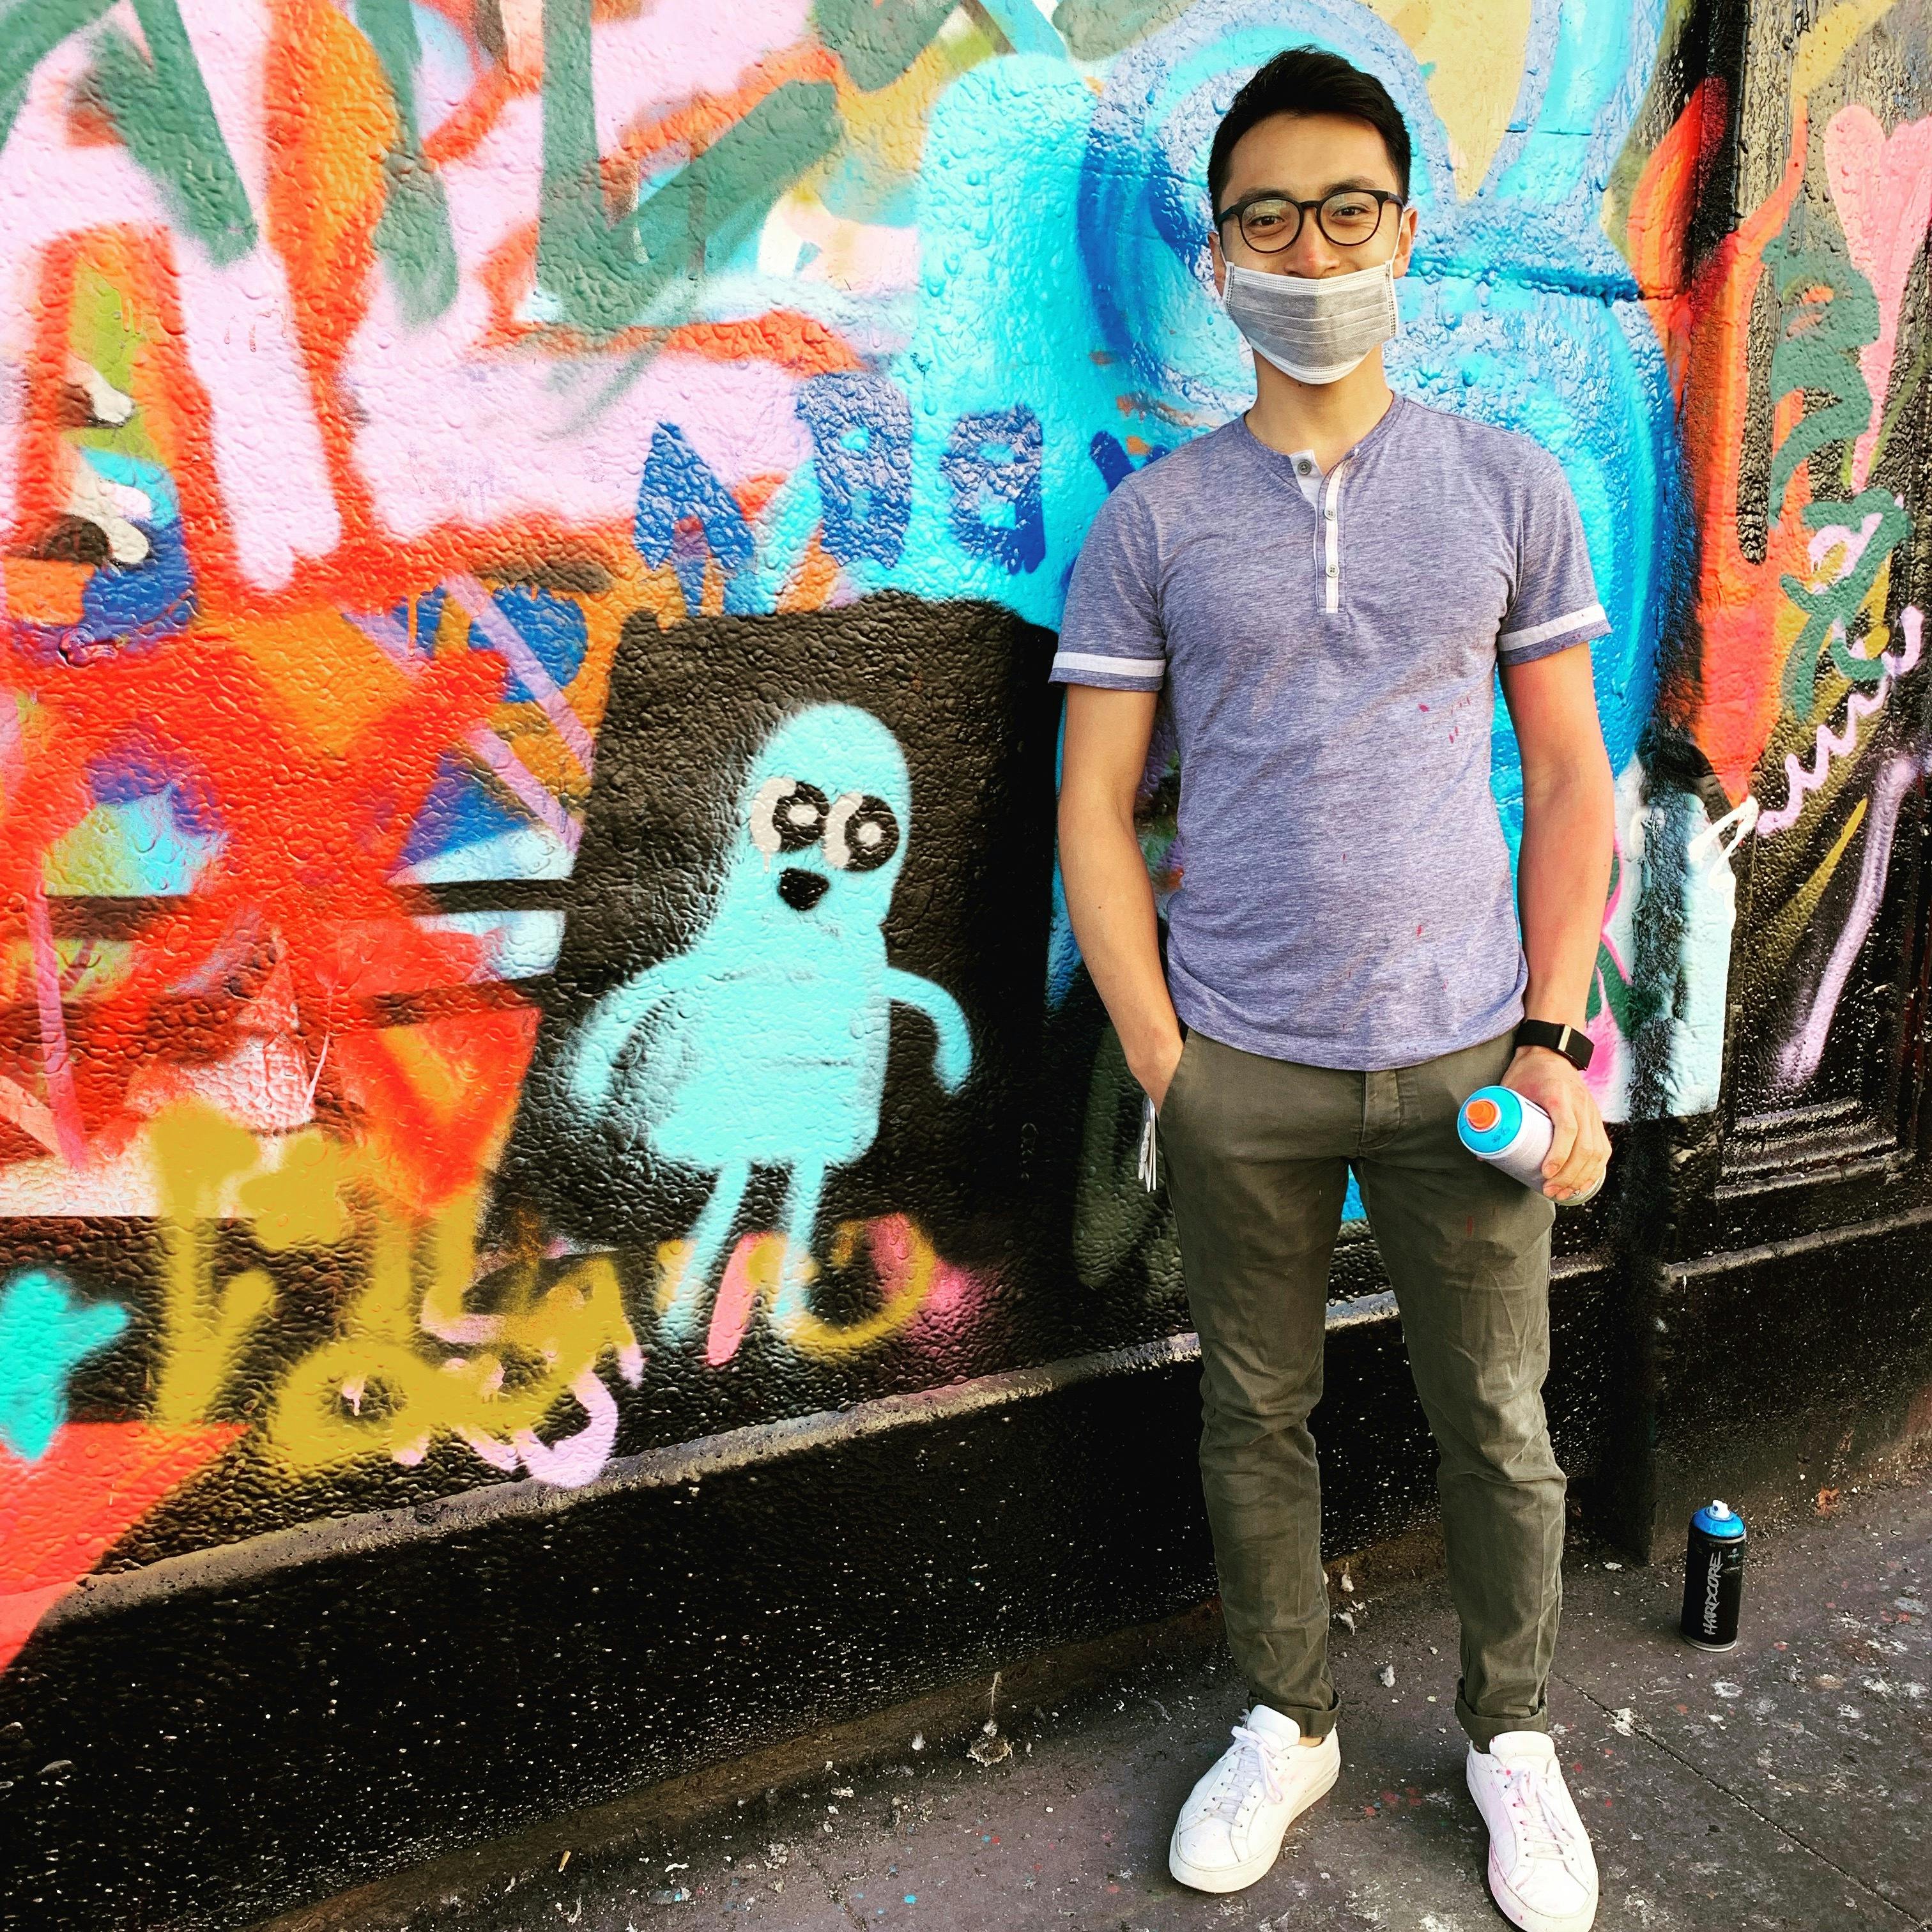 Alex, in a mask, is standing next to a character he drew with spray paint on a wall